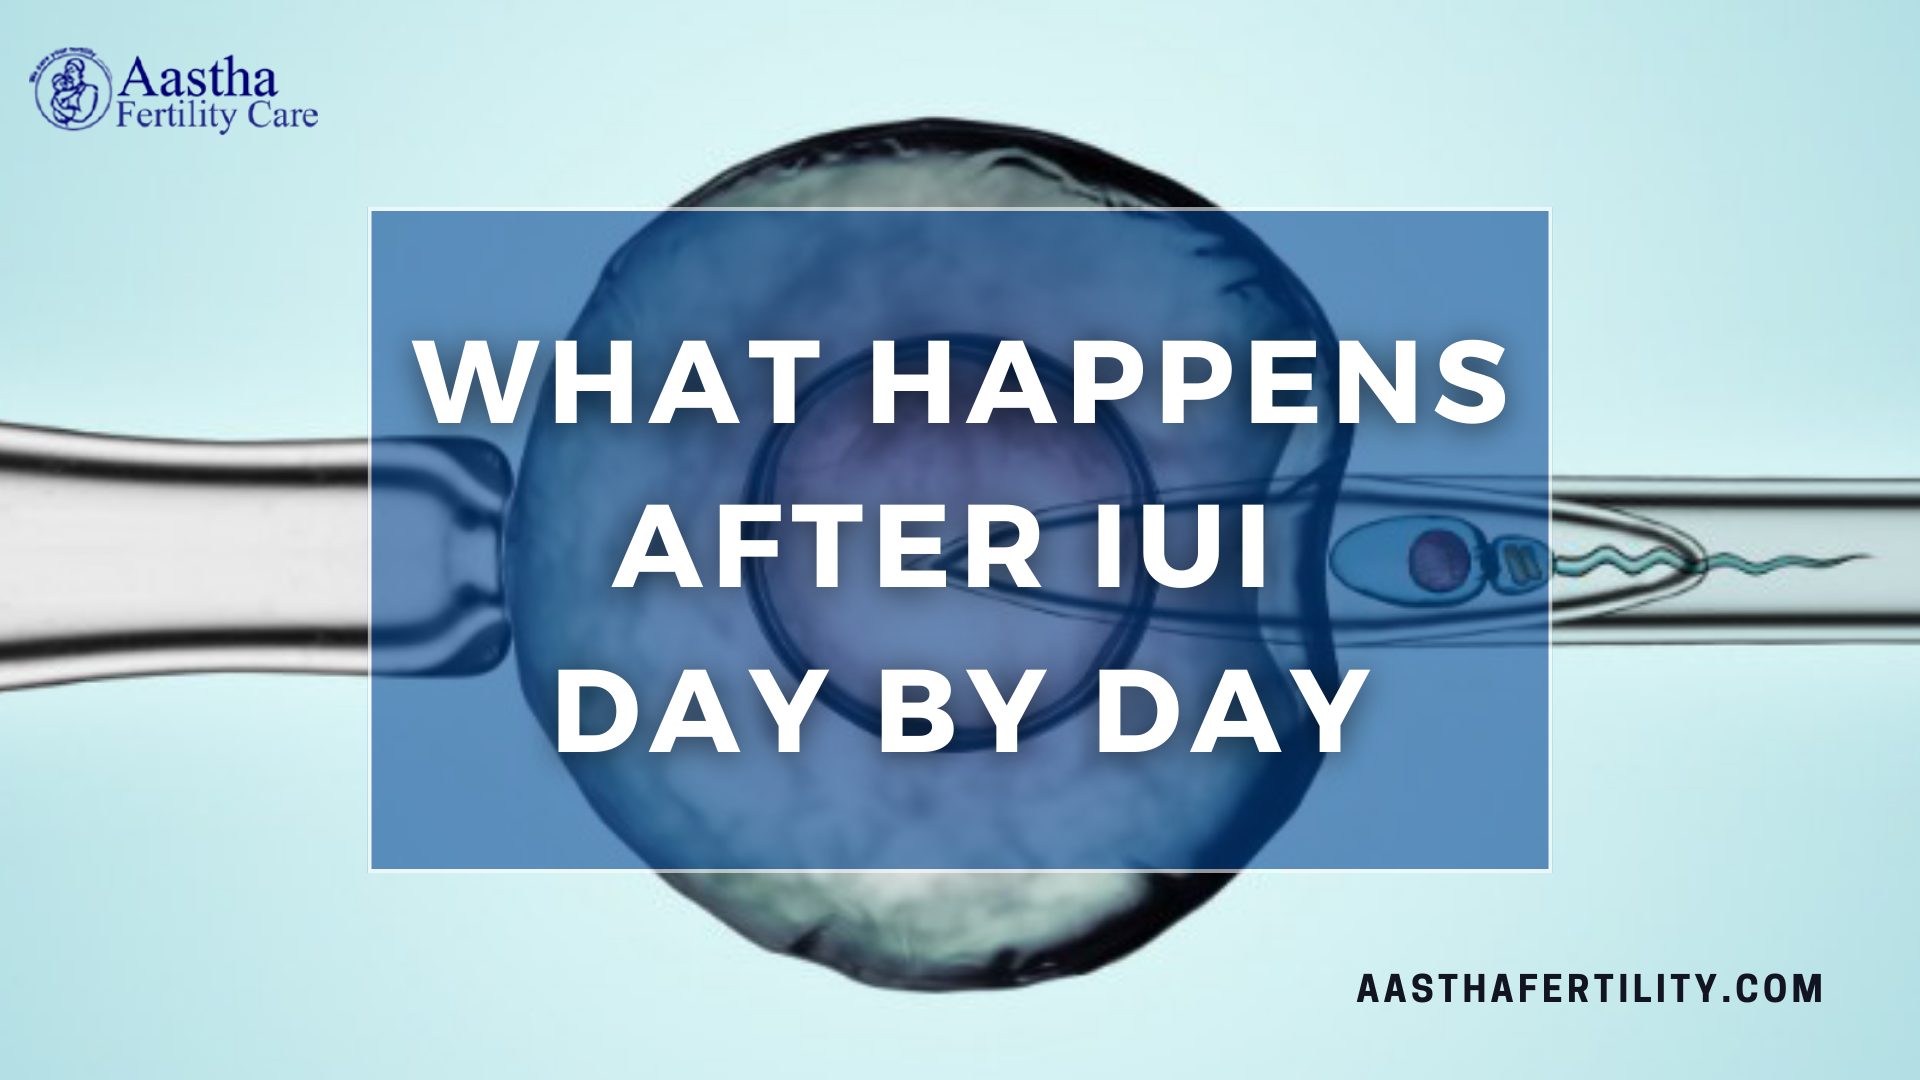 What Happens After IUI Day by Day